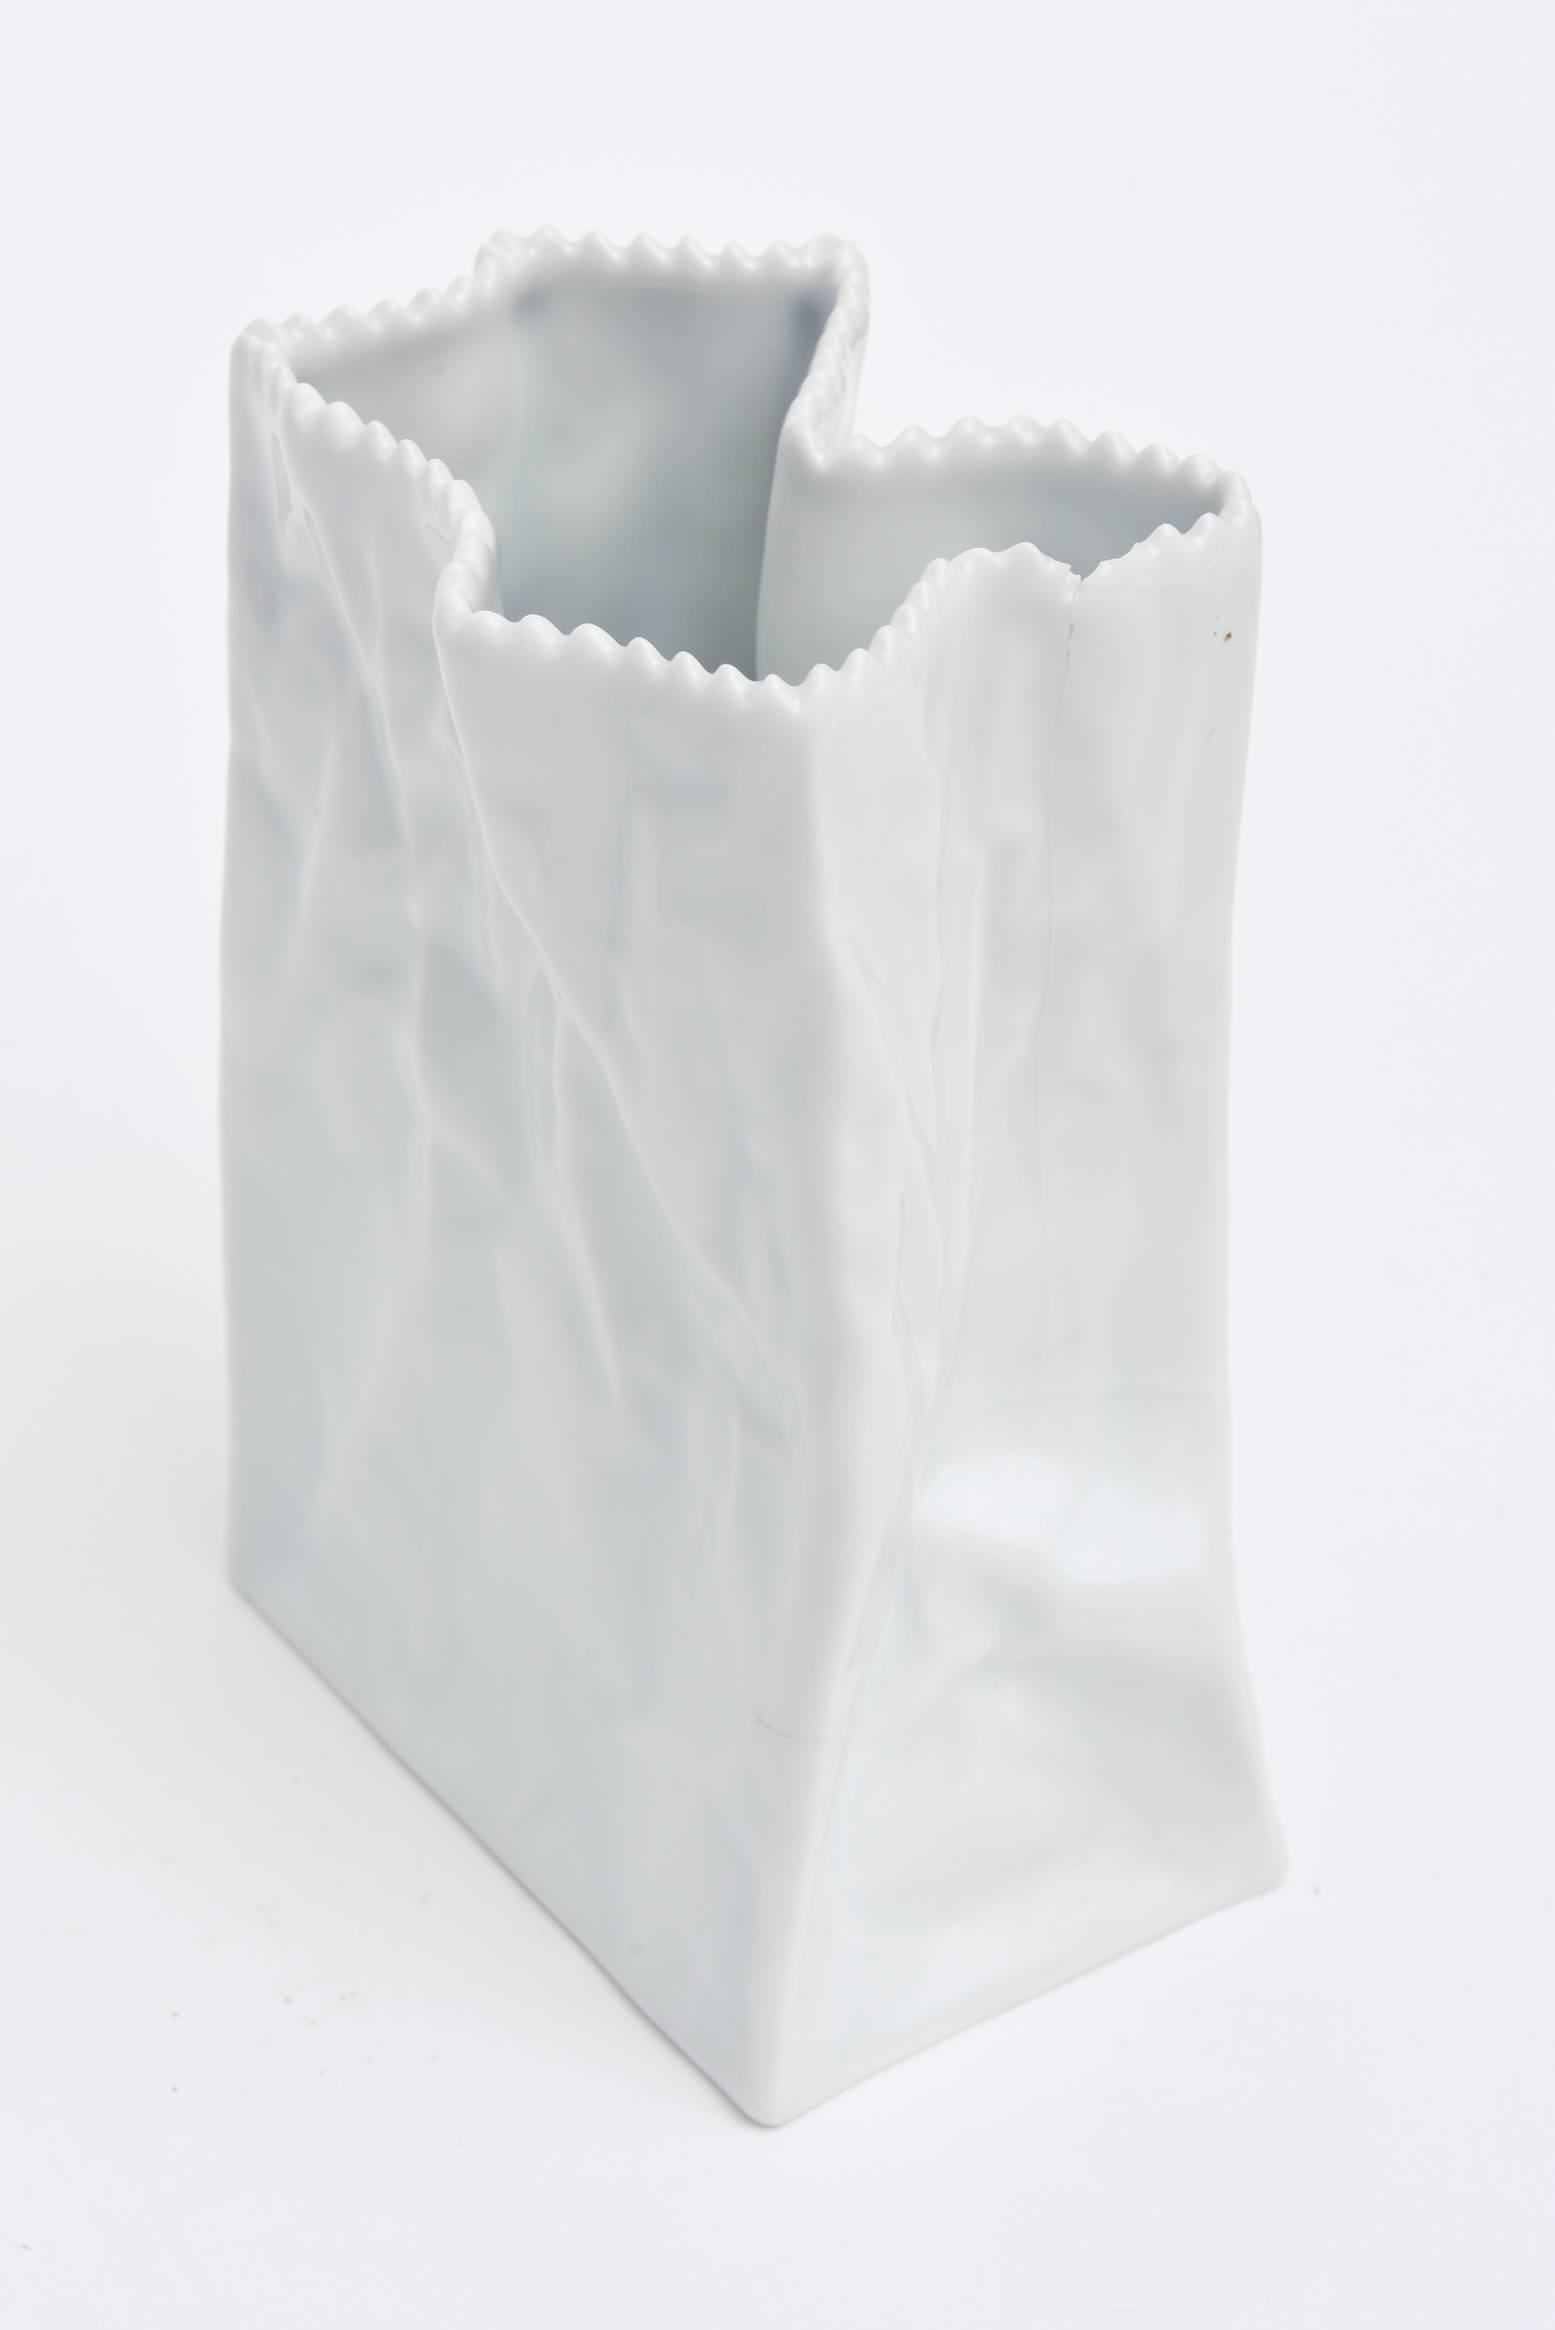 Late 20th Century Pair of Rosenthal Crushed/ Crinkled White Glazed Porcelain Bags/ Vases/ Vessels